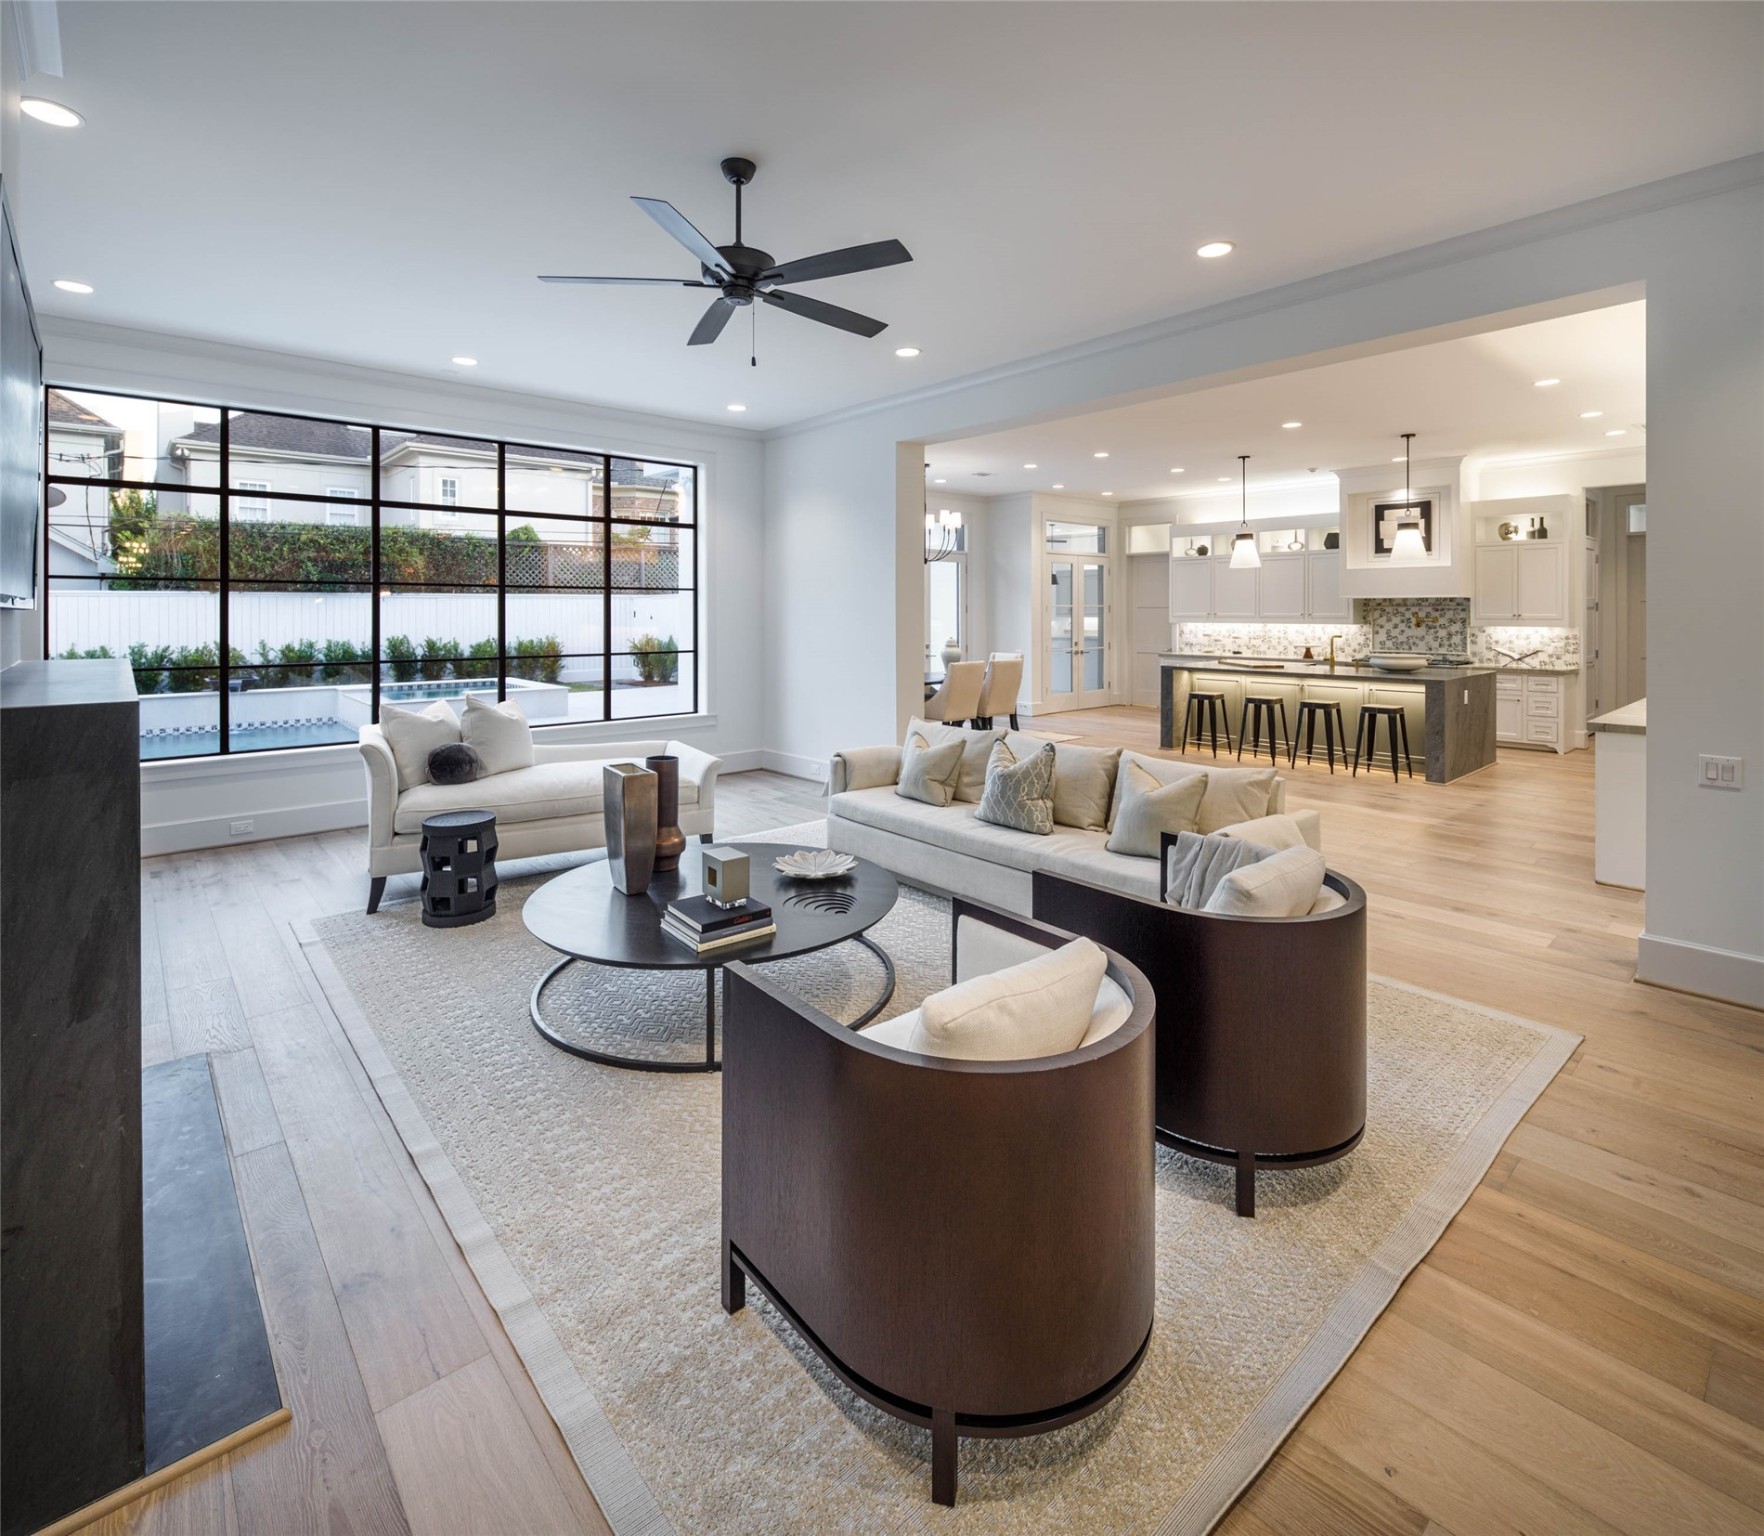 Alternate family room with engineered white Oak wood floors and a wall of windows with Southern exposure and extended views to the Pool/spa and back yard